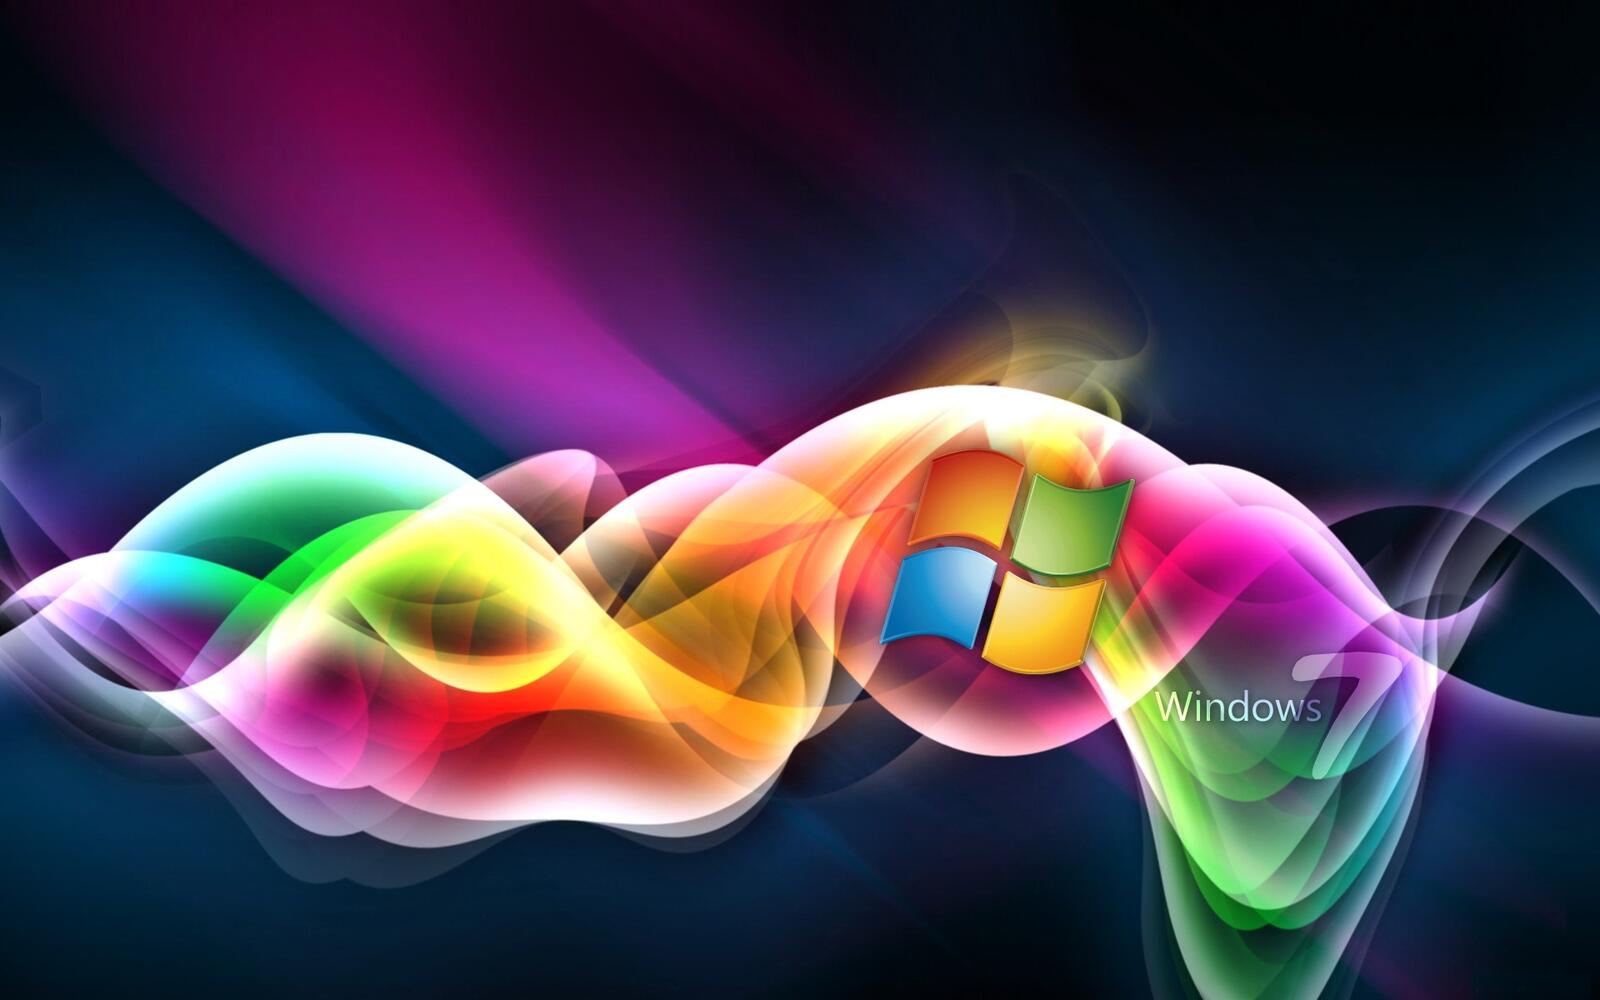 Wallpapers for Windows 7 colorful logo on the desktop